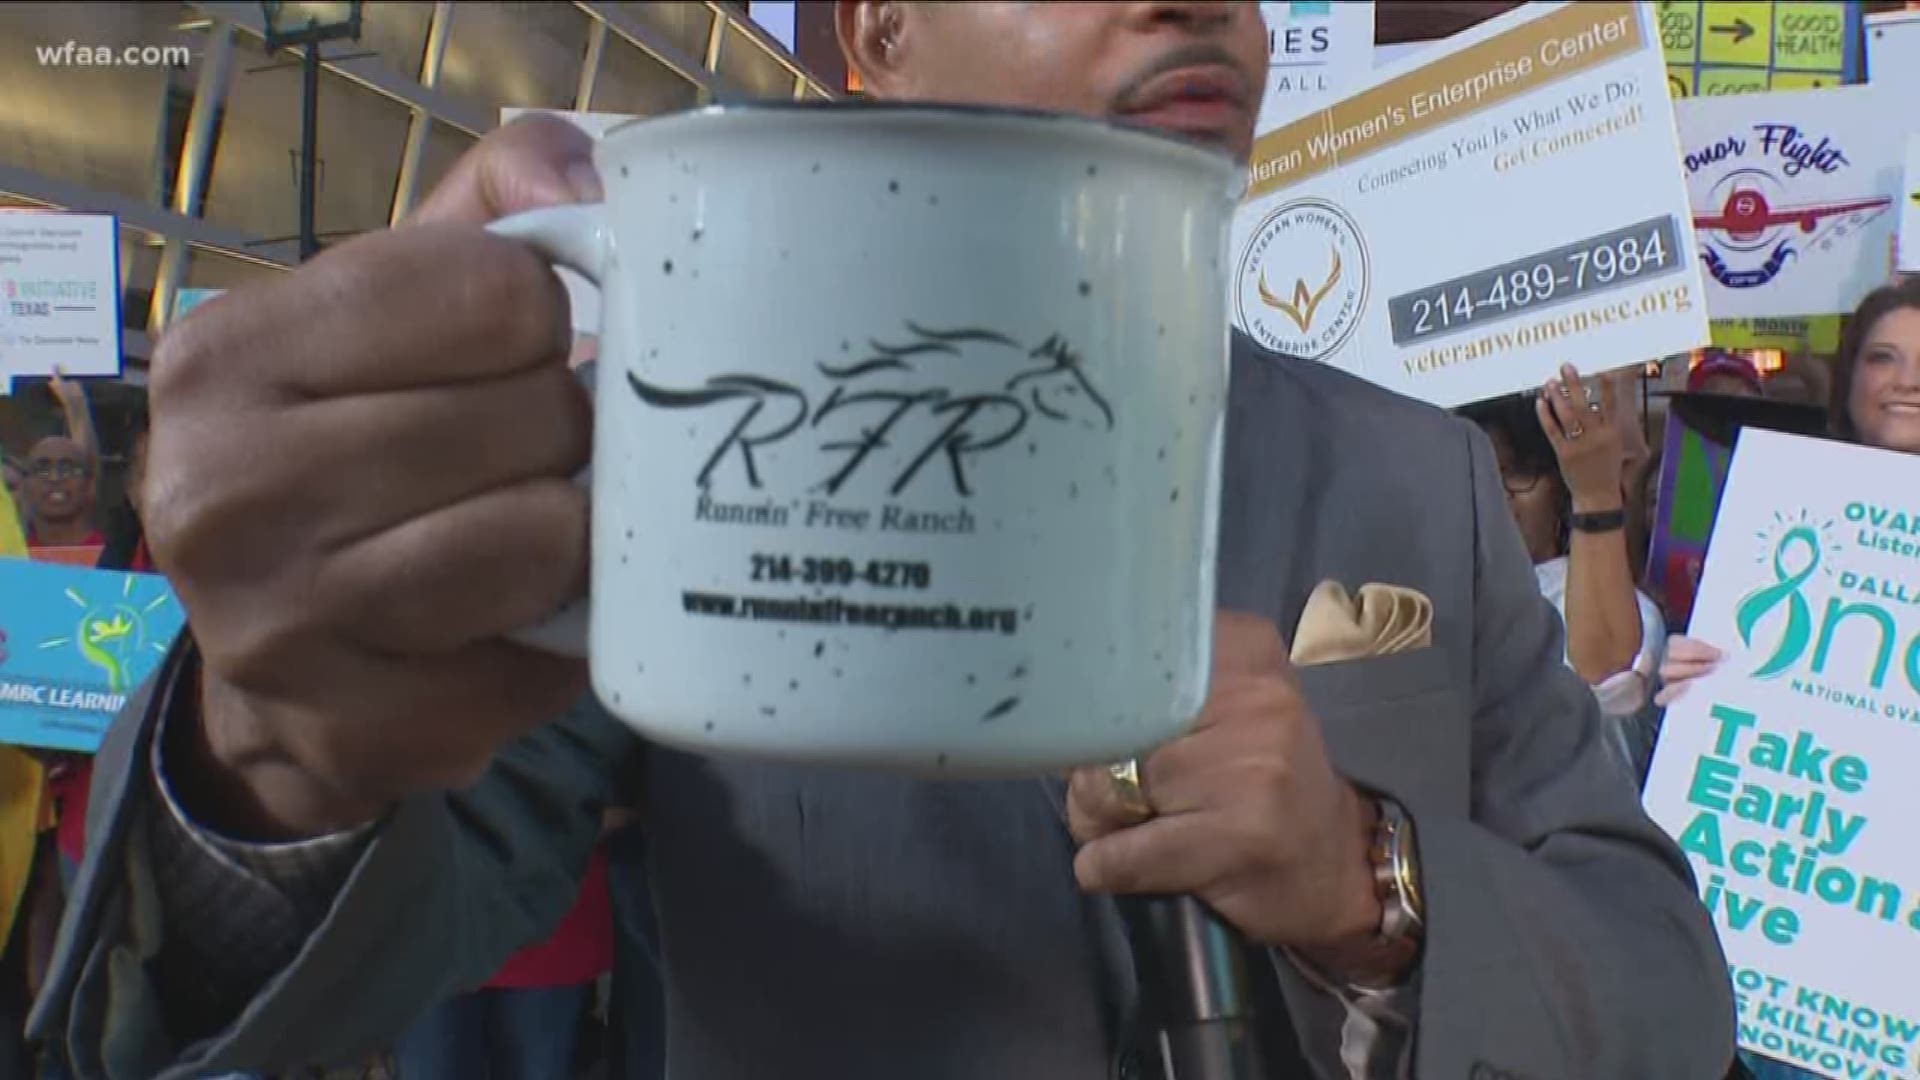 Each day leading up to North Texas Giving Day, Greg Fields is featuring a mug from a different charity.